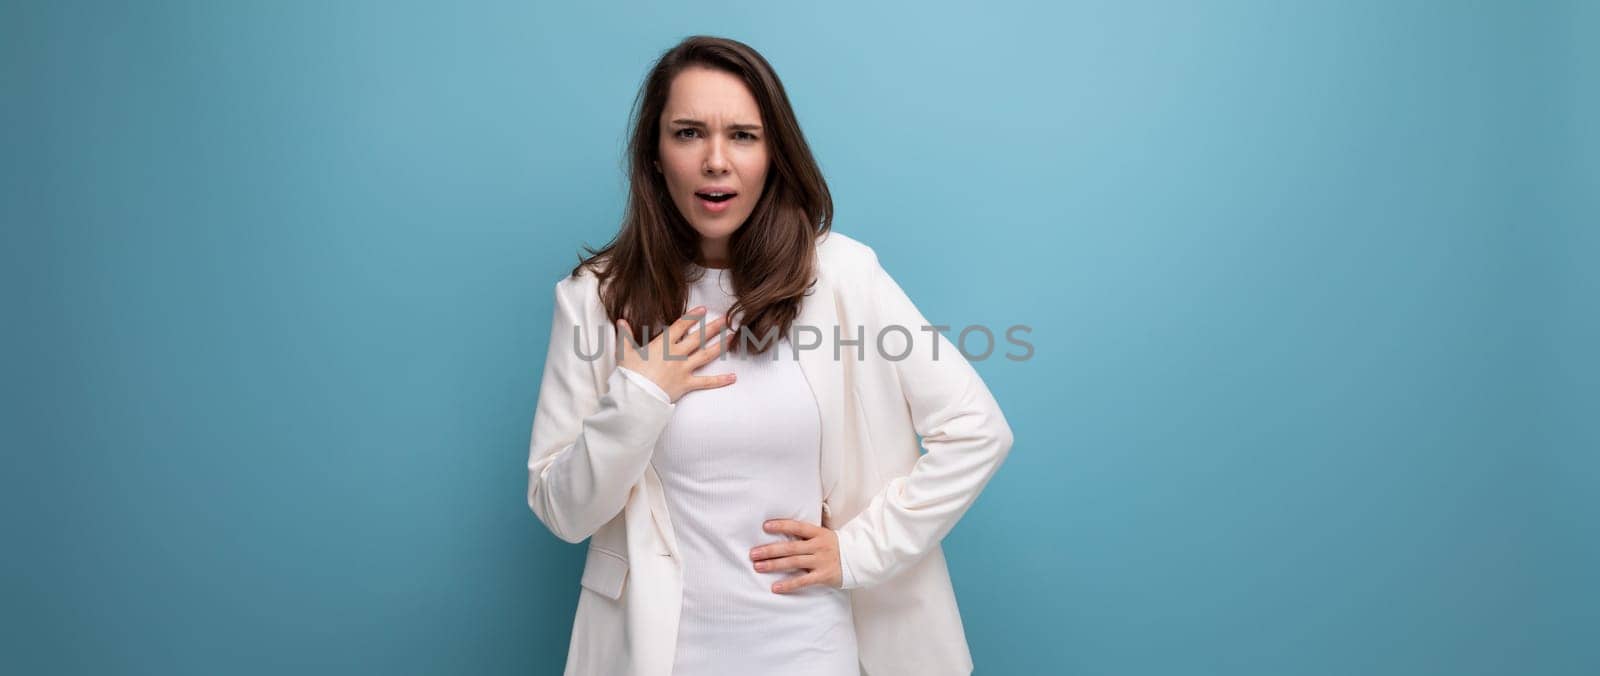 surprised brunette woman in dress with blue copyspace by TRMK